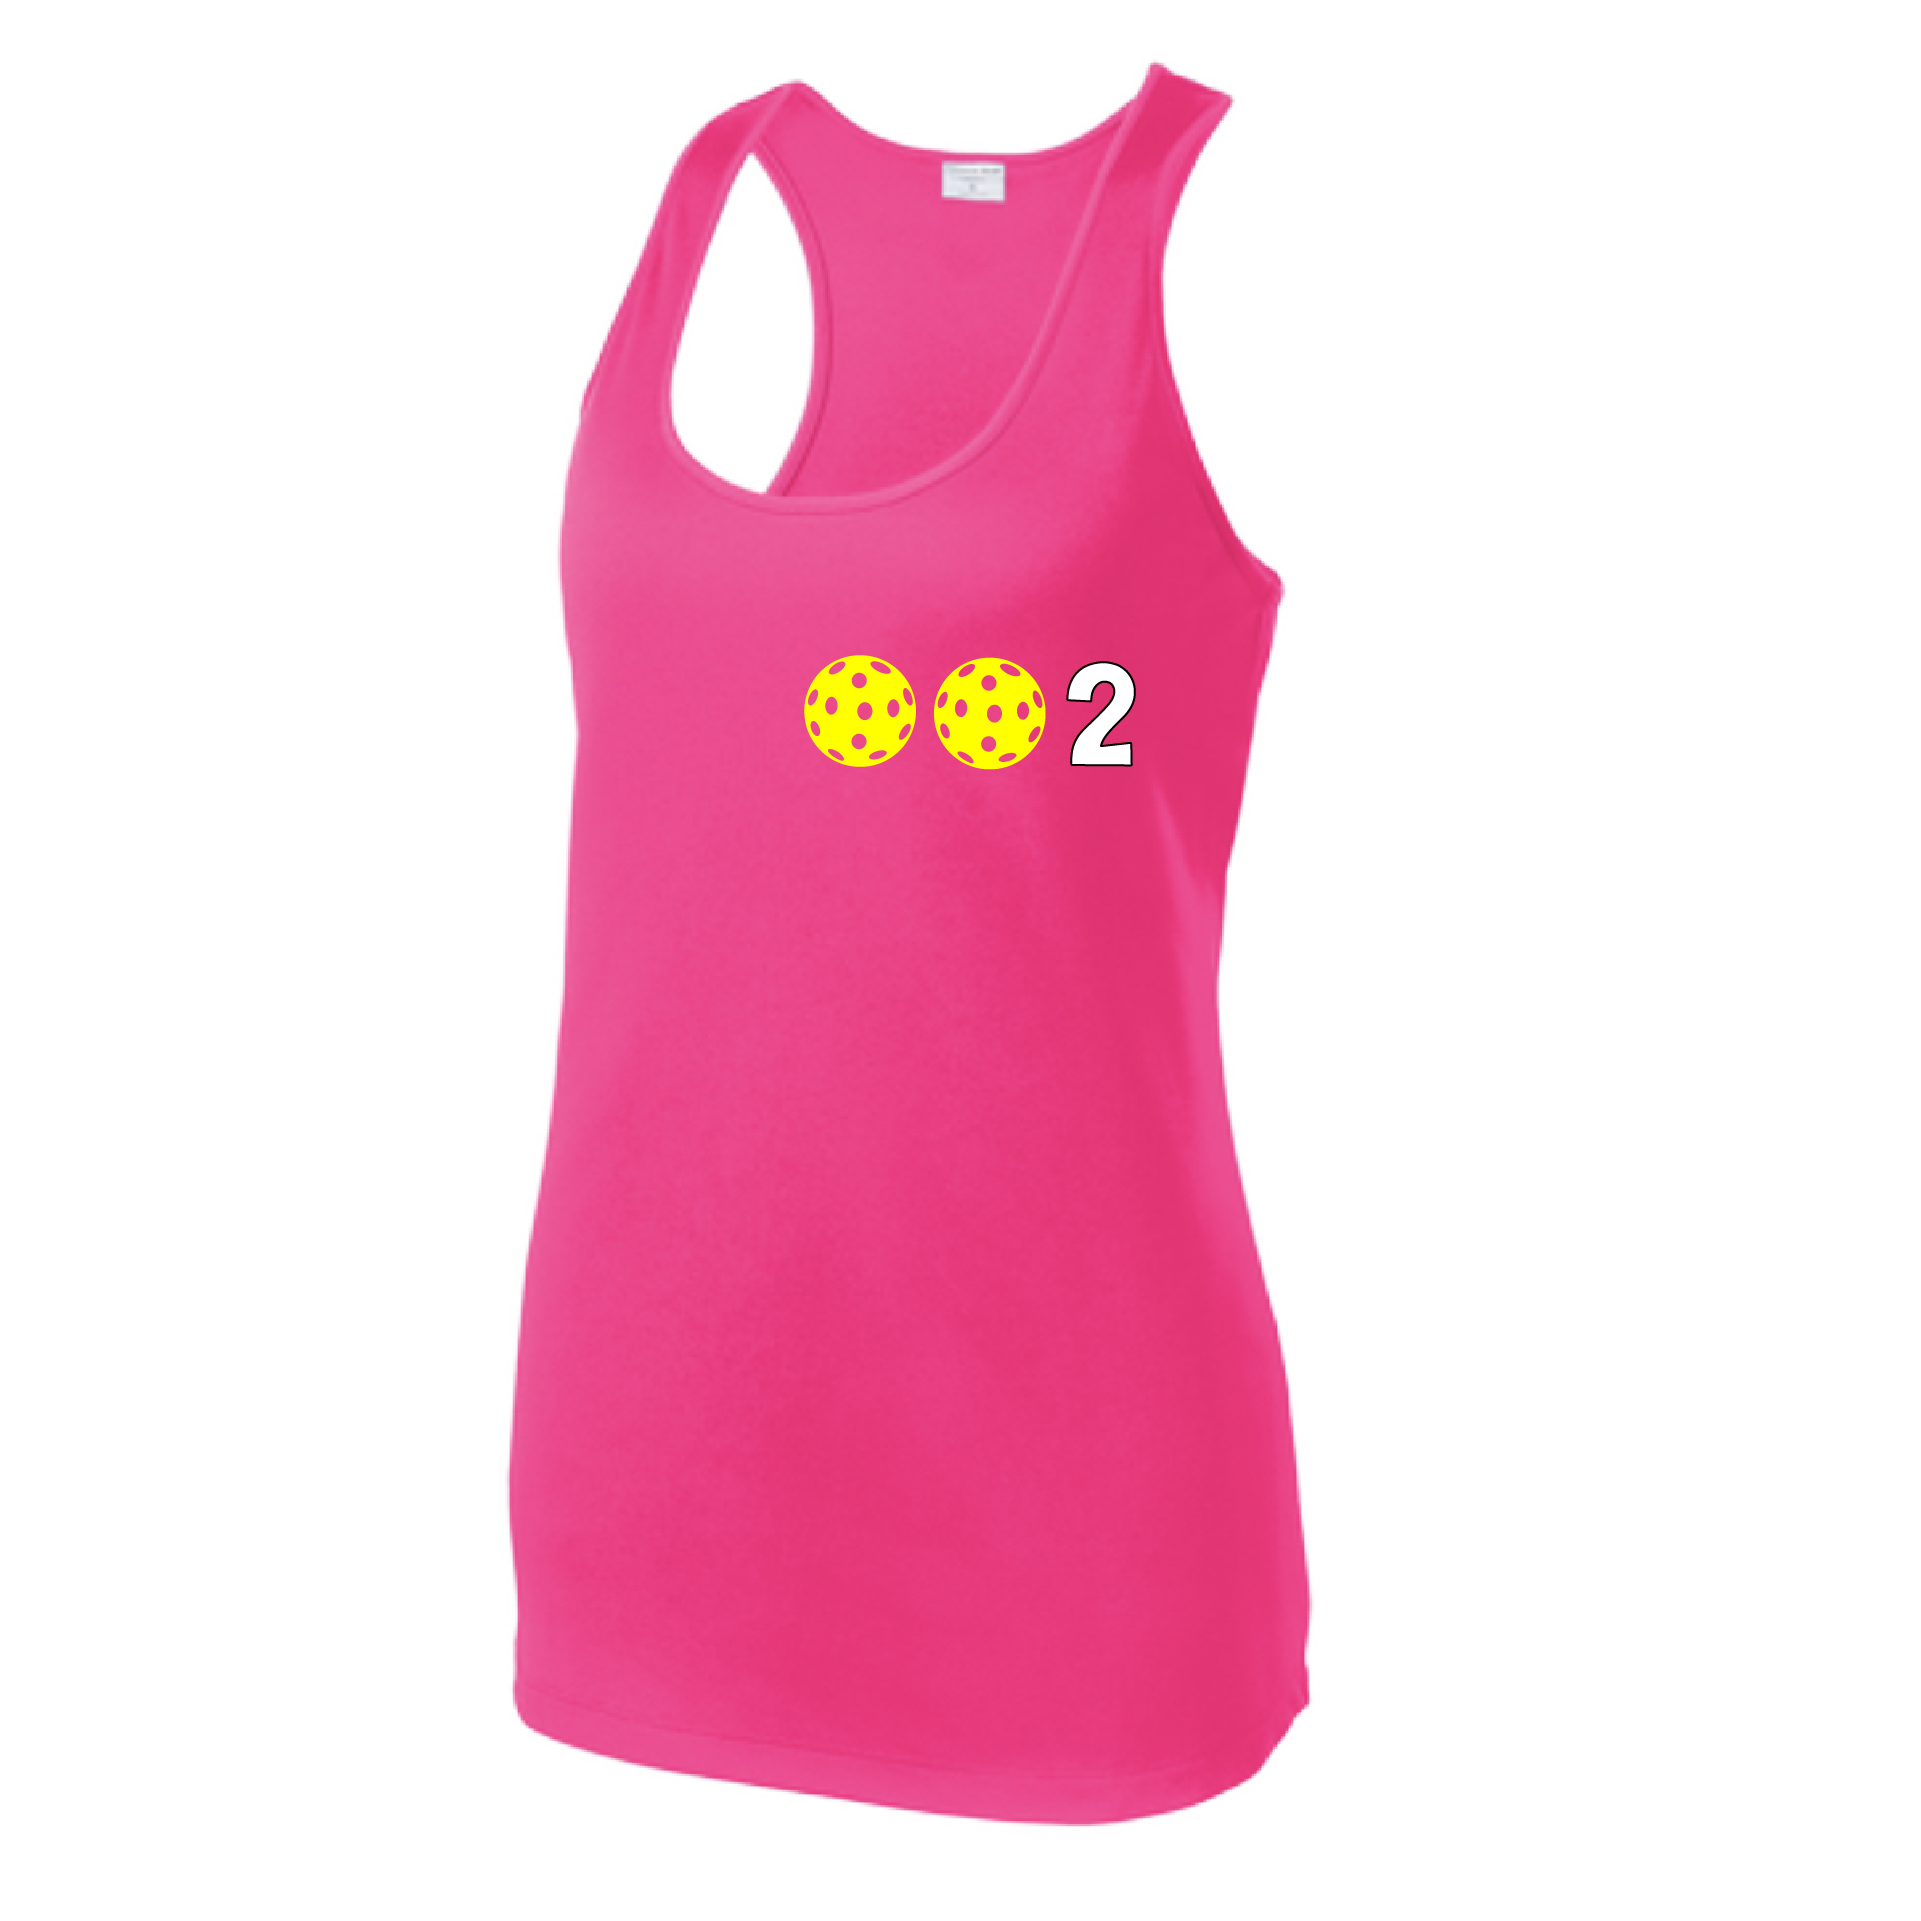 Design: 002 with Customizable Ball Colors (Yellow, Pink, White)  Women's Styles: Racerback Tank  Shirts are lightweight, roomy and highly breathable. These moisture-wicking shirts are designed for athletic performance. They feature PosiCharge technology to lock in color and prevent logos from fading. Removable tag and set-in sleeves for comfort.